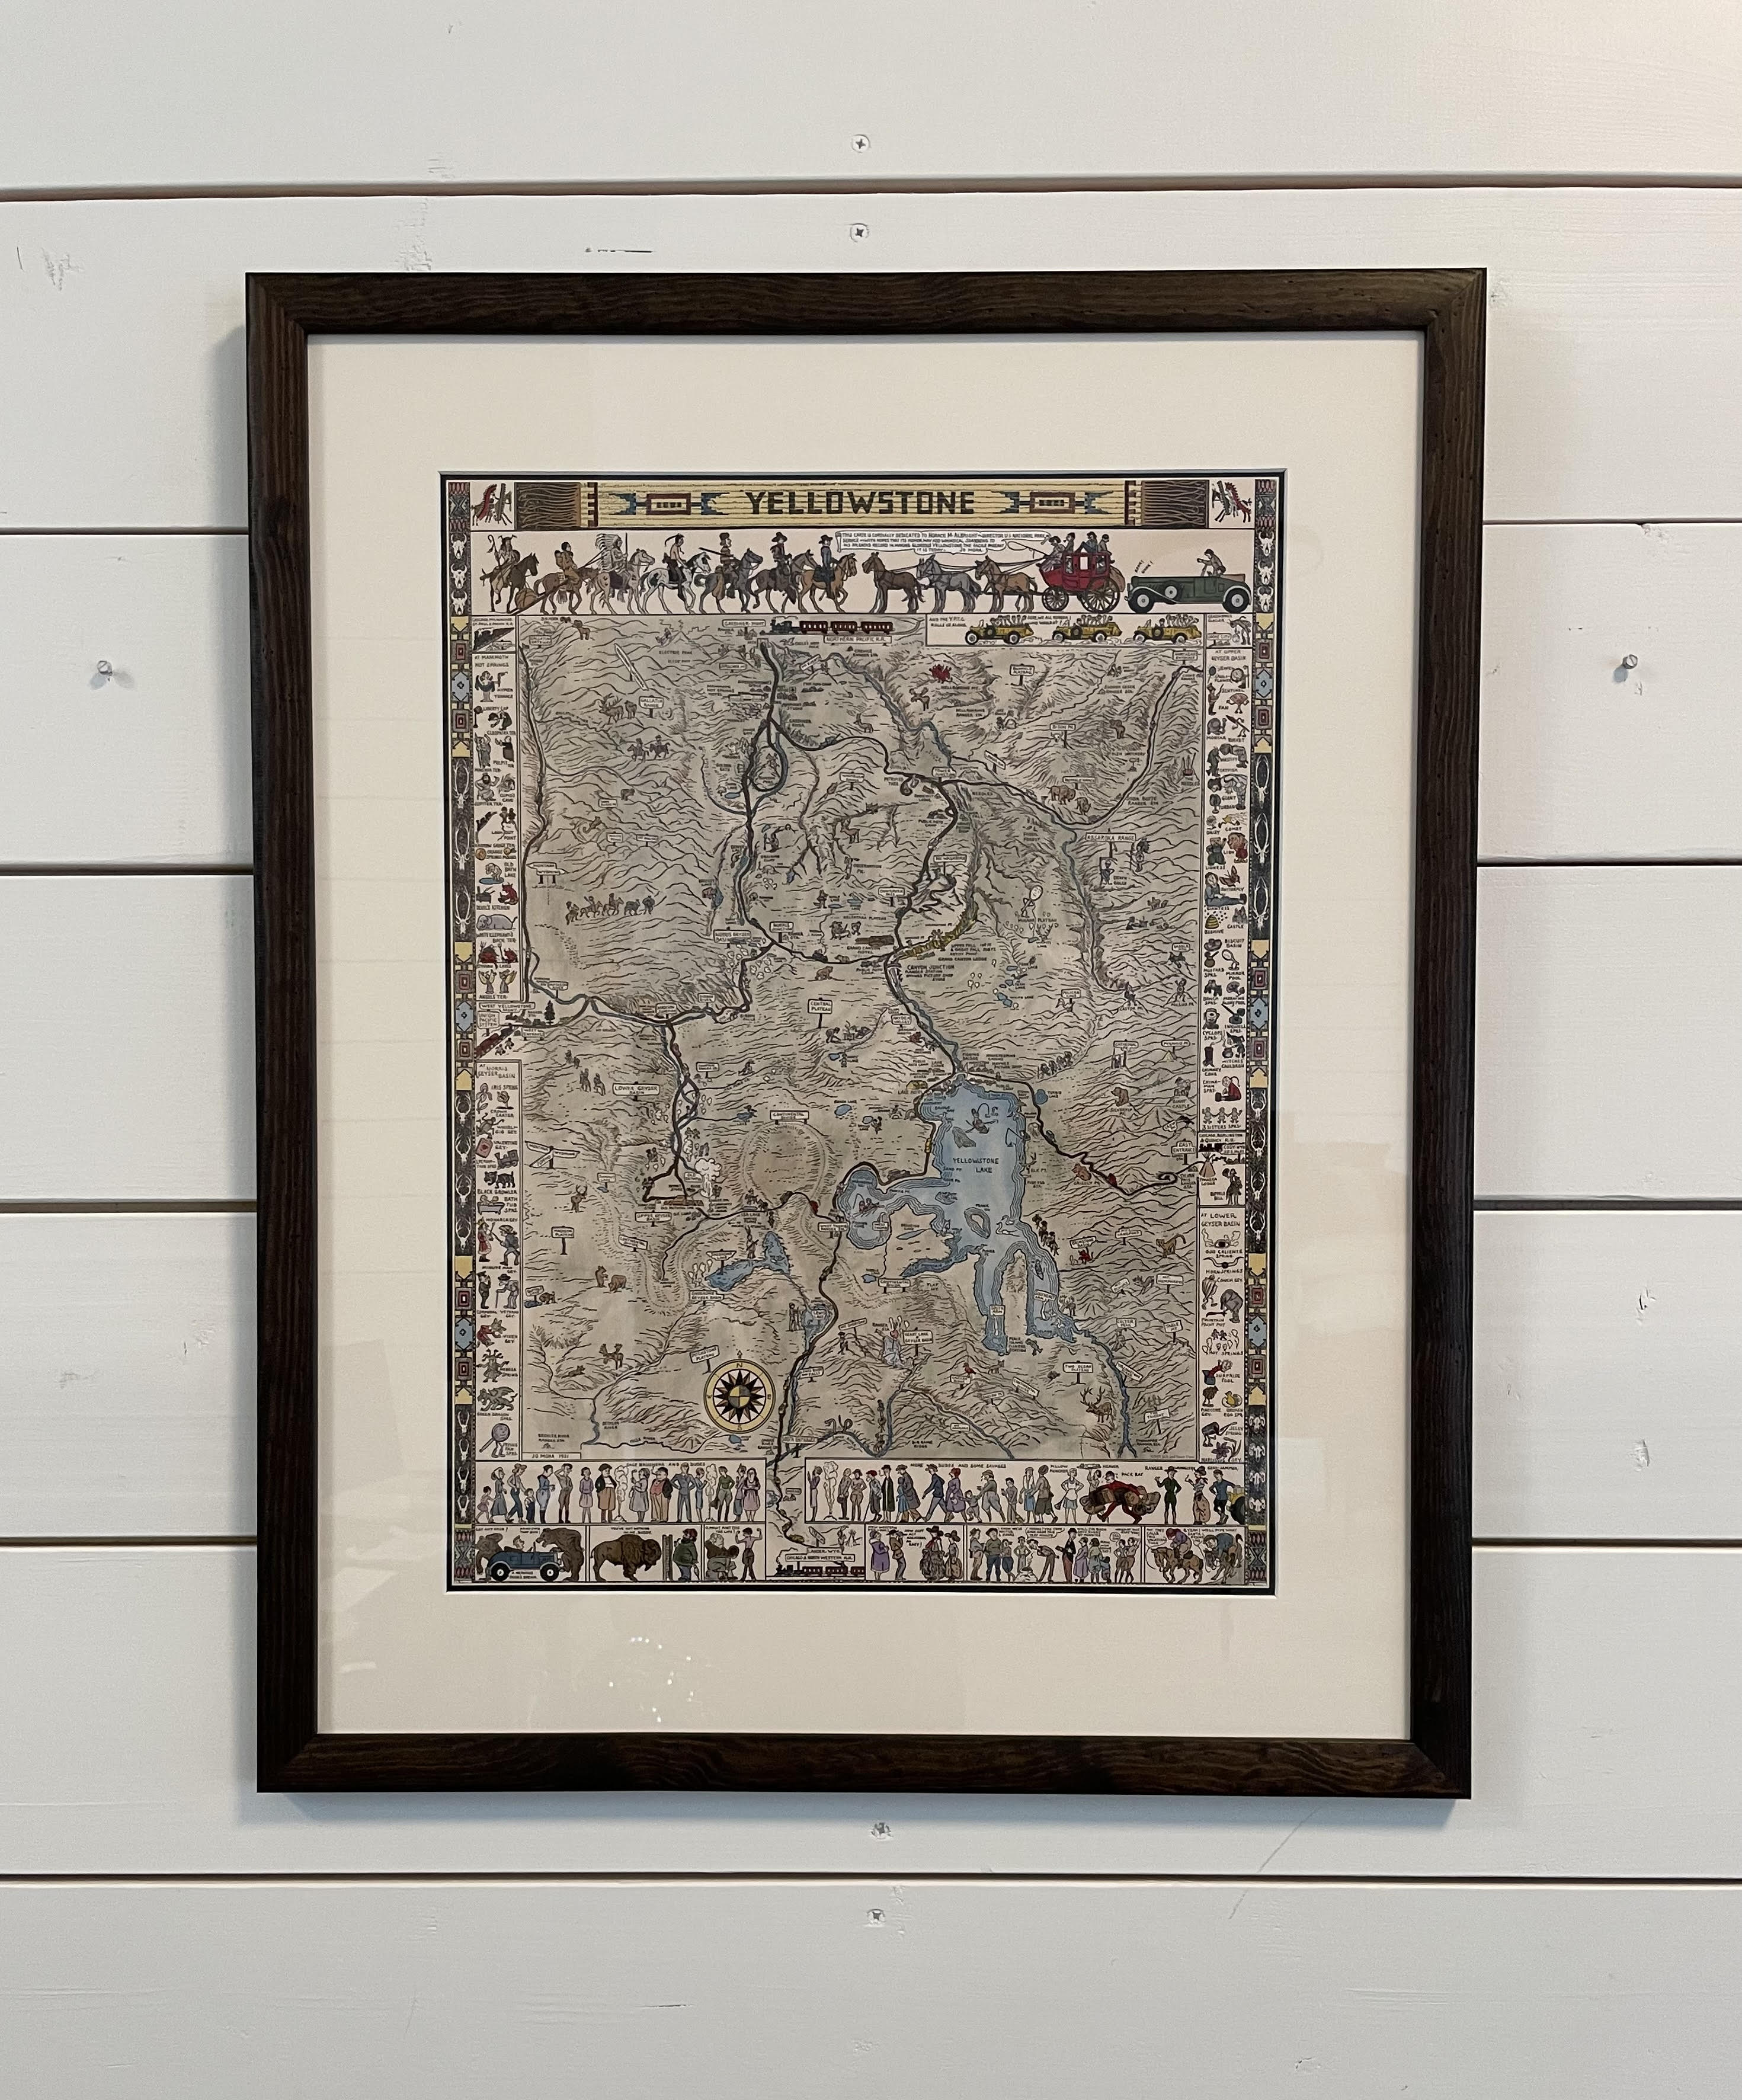 Framed 1931 Tinted Jo Mora Map of Yellowstone National Park